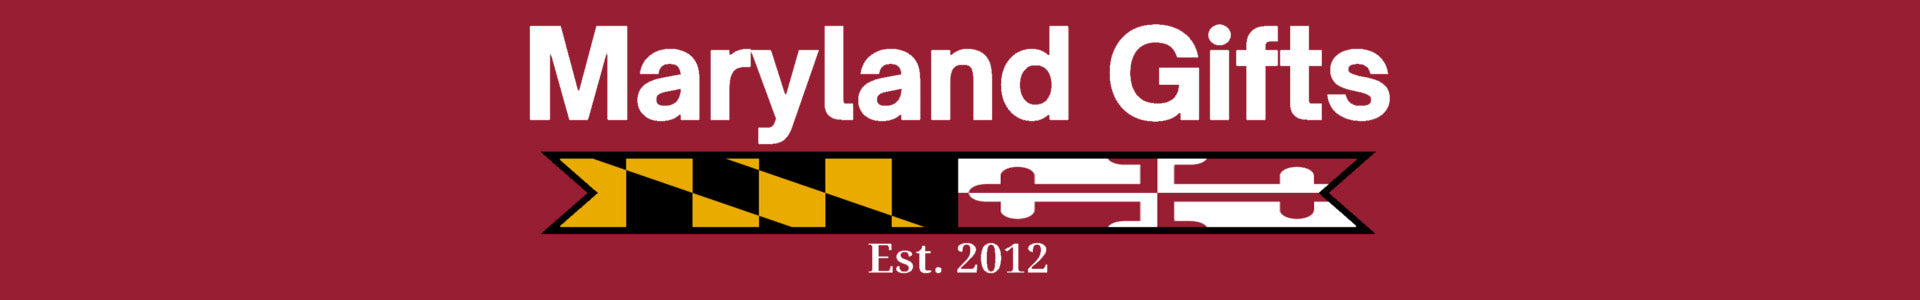 Maryland Themed Clothing and Apparel | Shop Maryland-Gifts.com